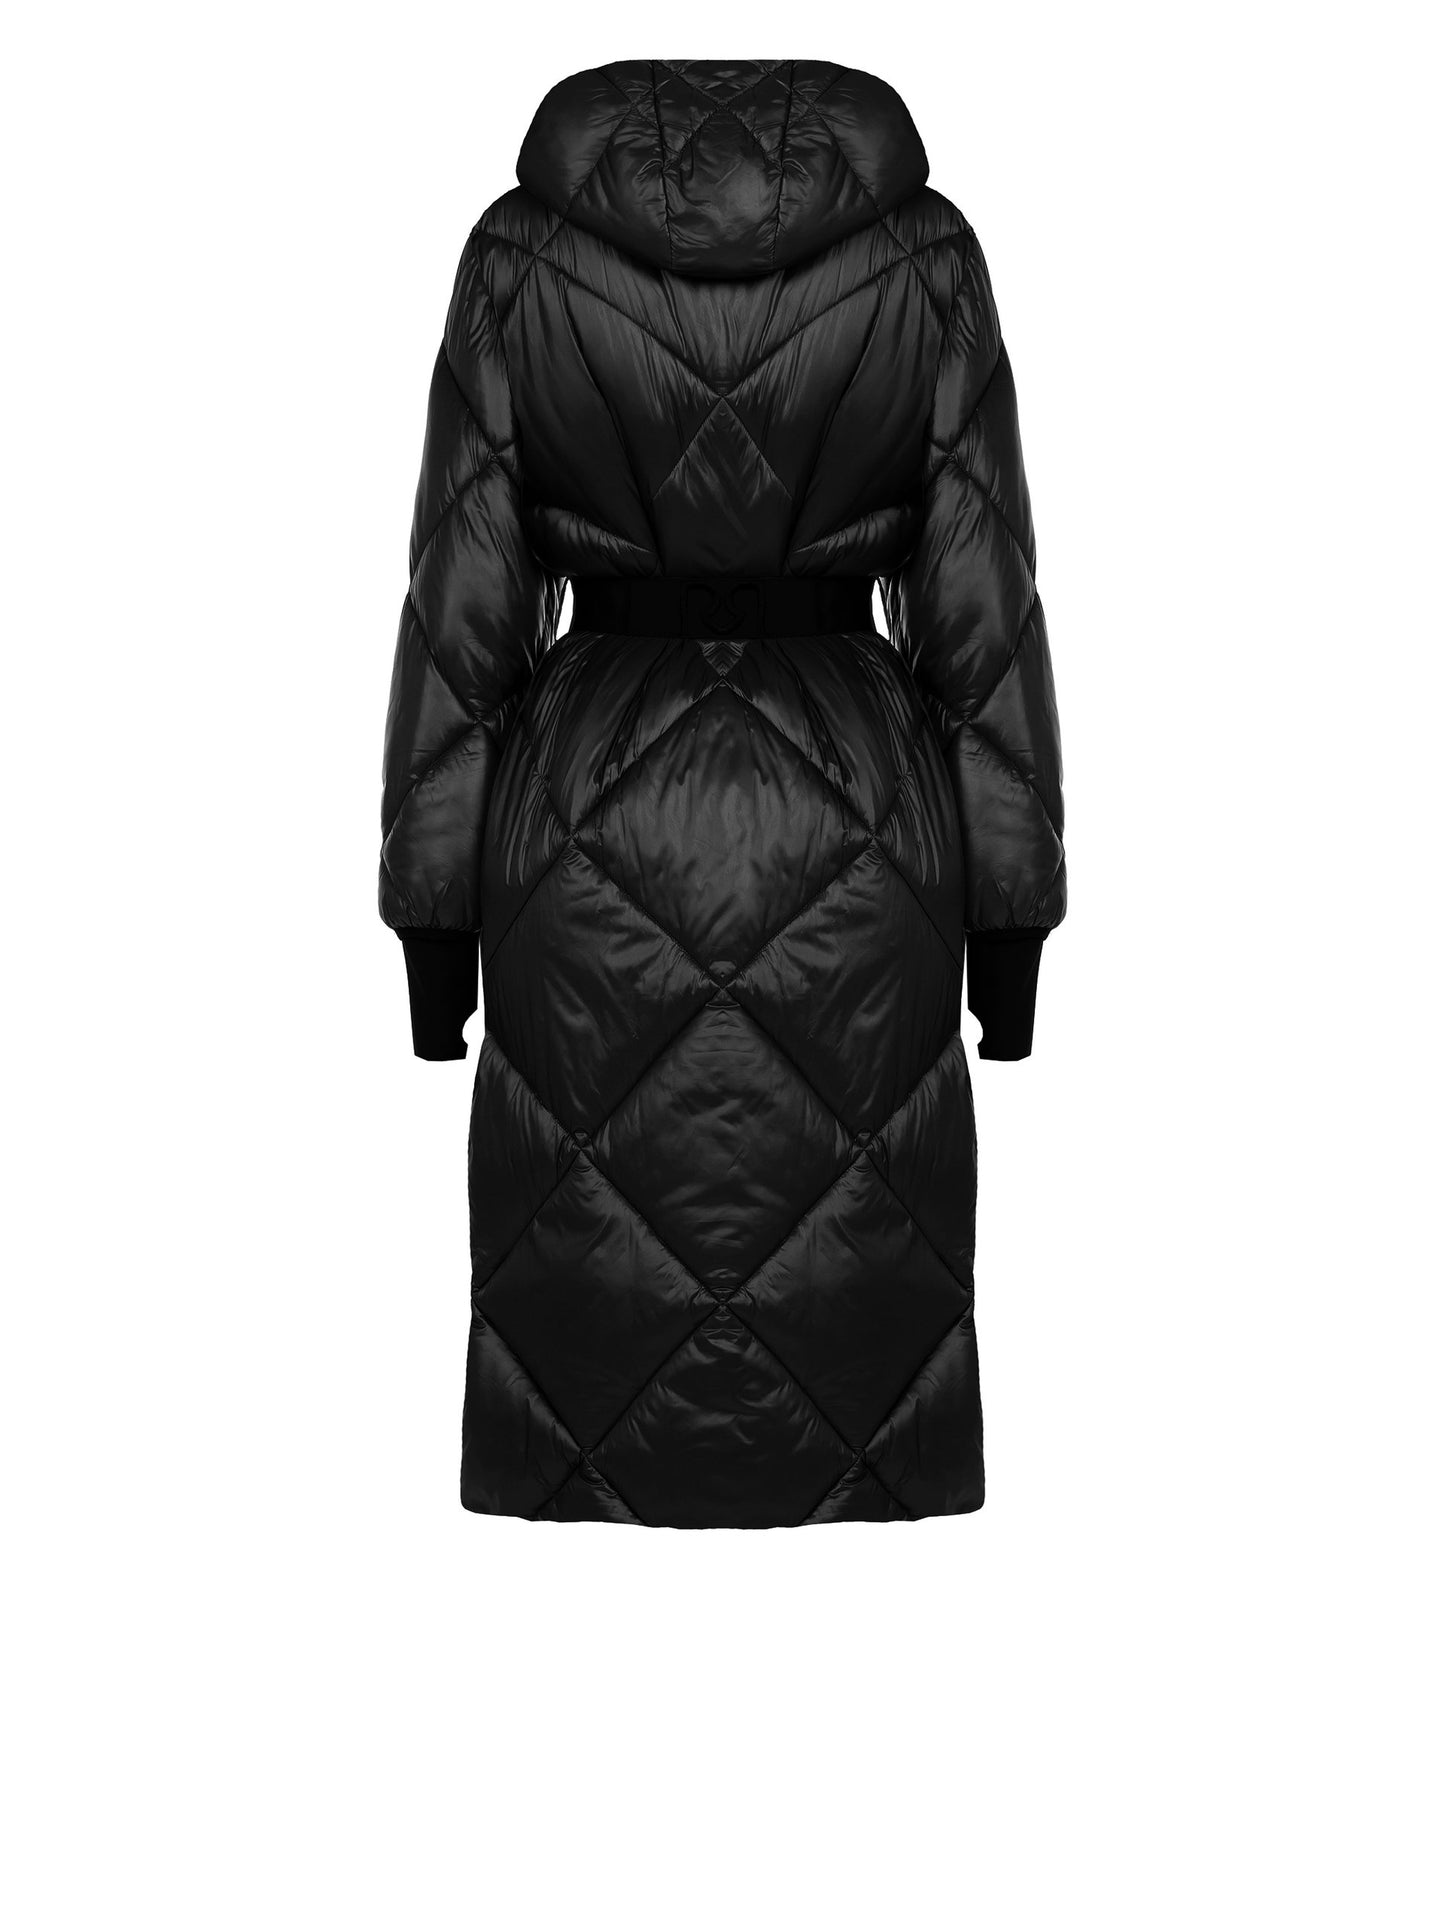 Long Puffer Coat with Arm Warmers